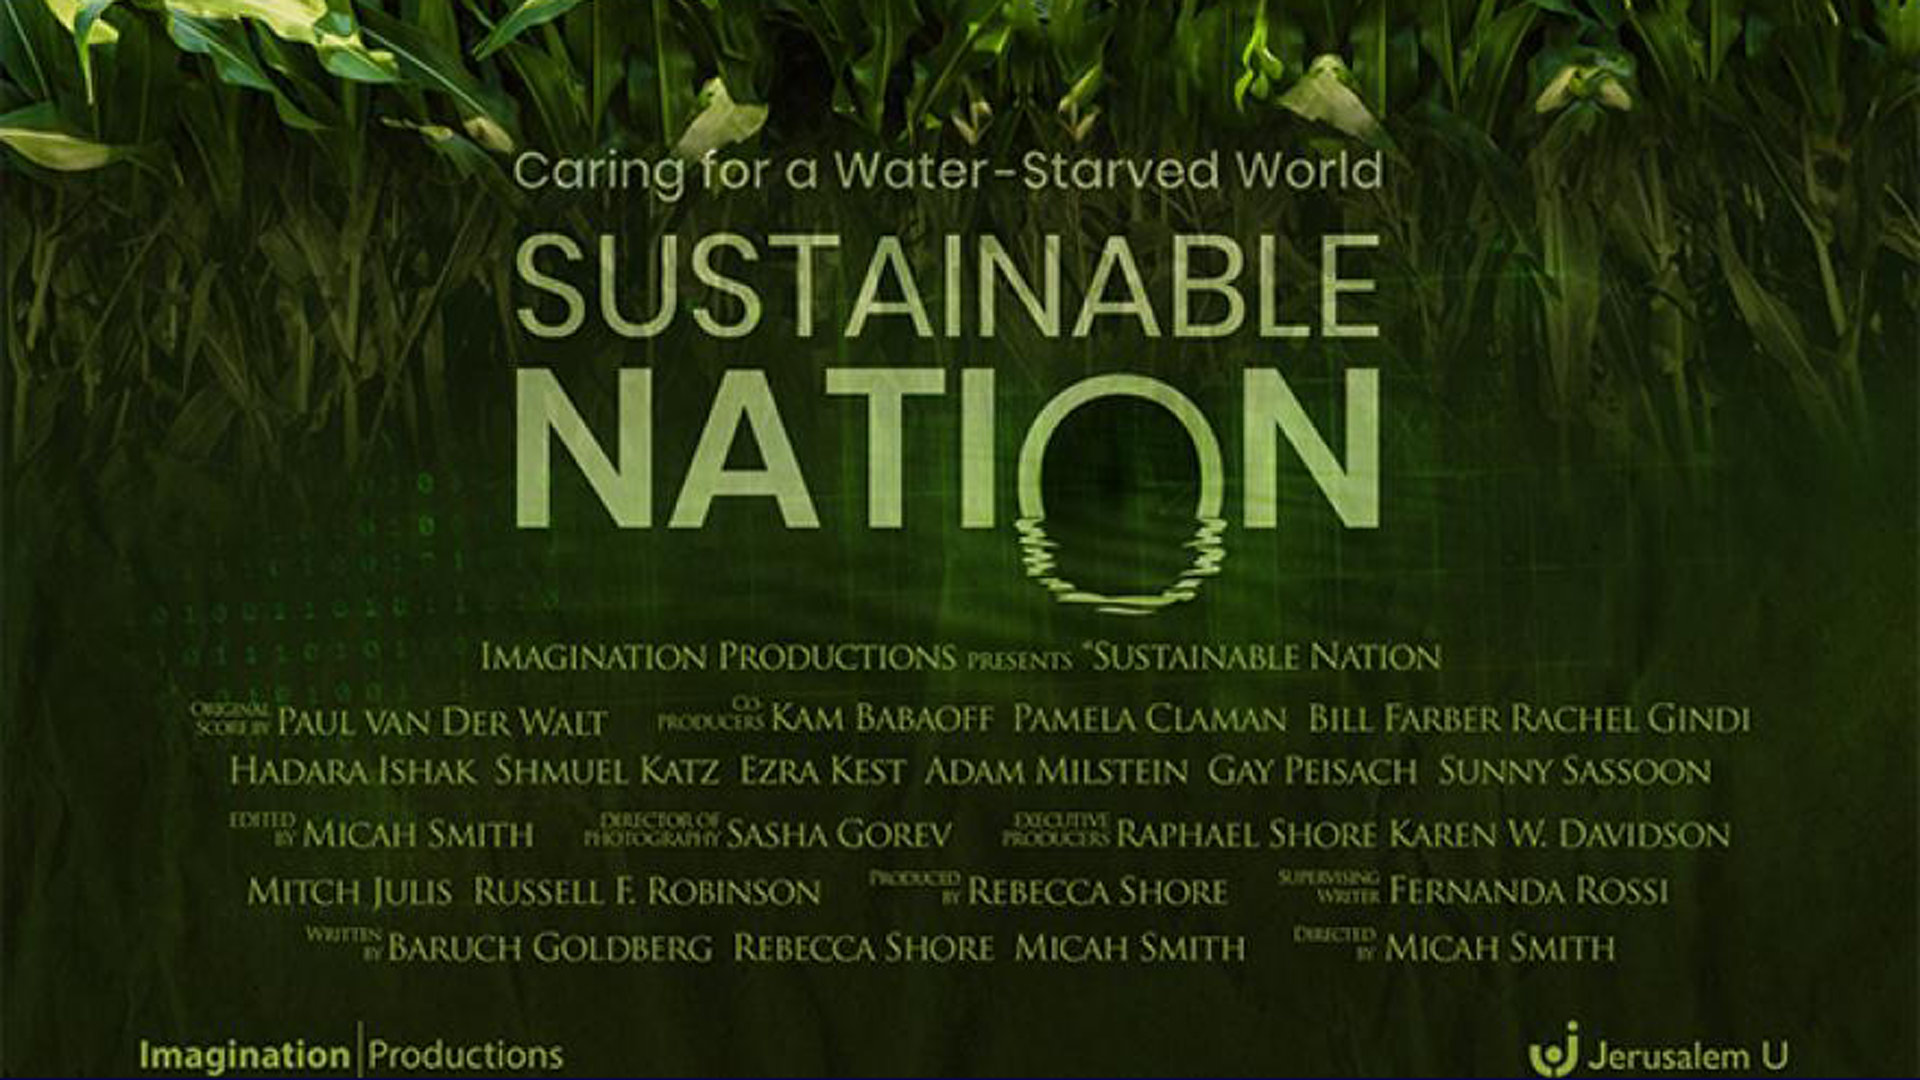 Sustainable Nation poster with credits and plants growing out of sitting water in background.